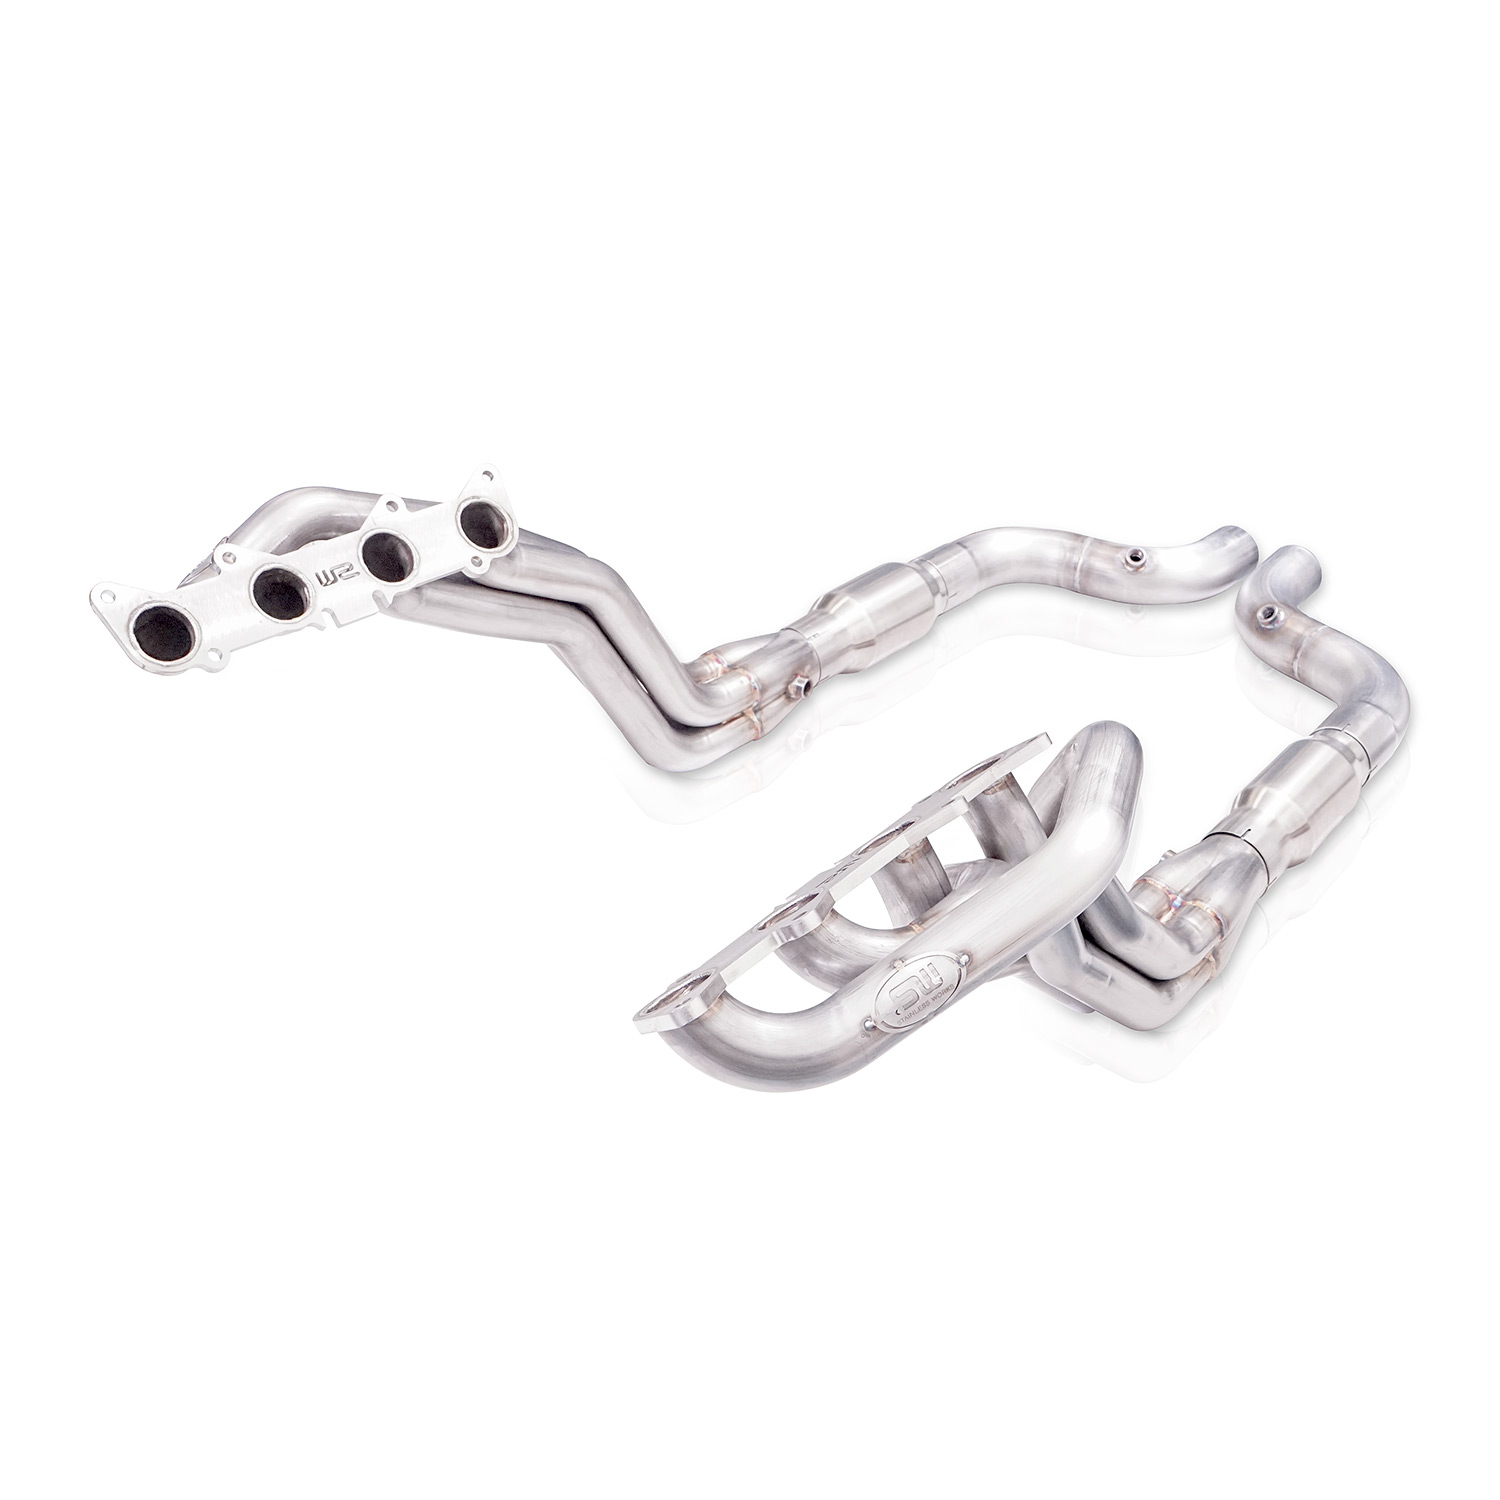 2015-2021 Mustang GT 5.0L SW Headers 1-7/8" With Catted Leads Performance Connect